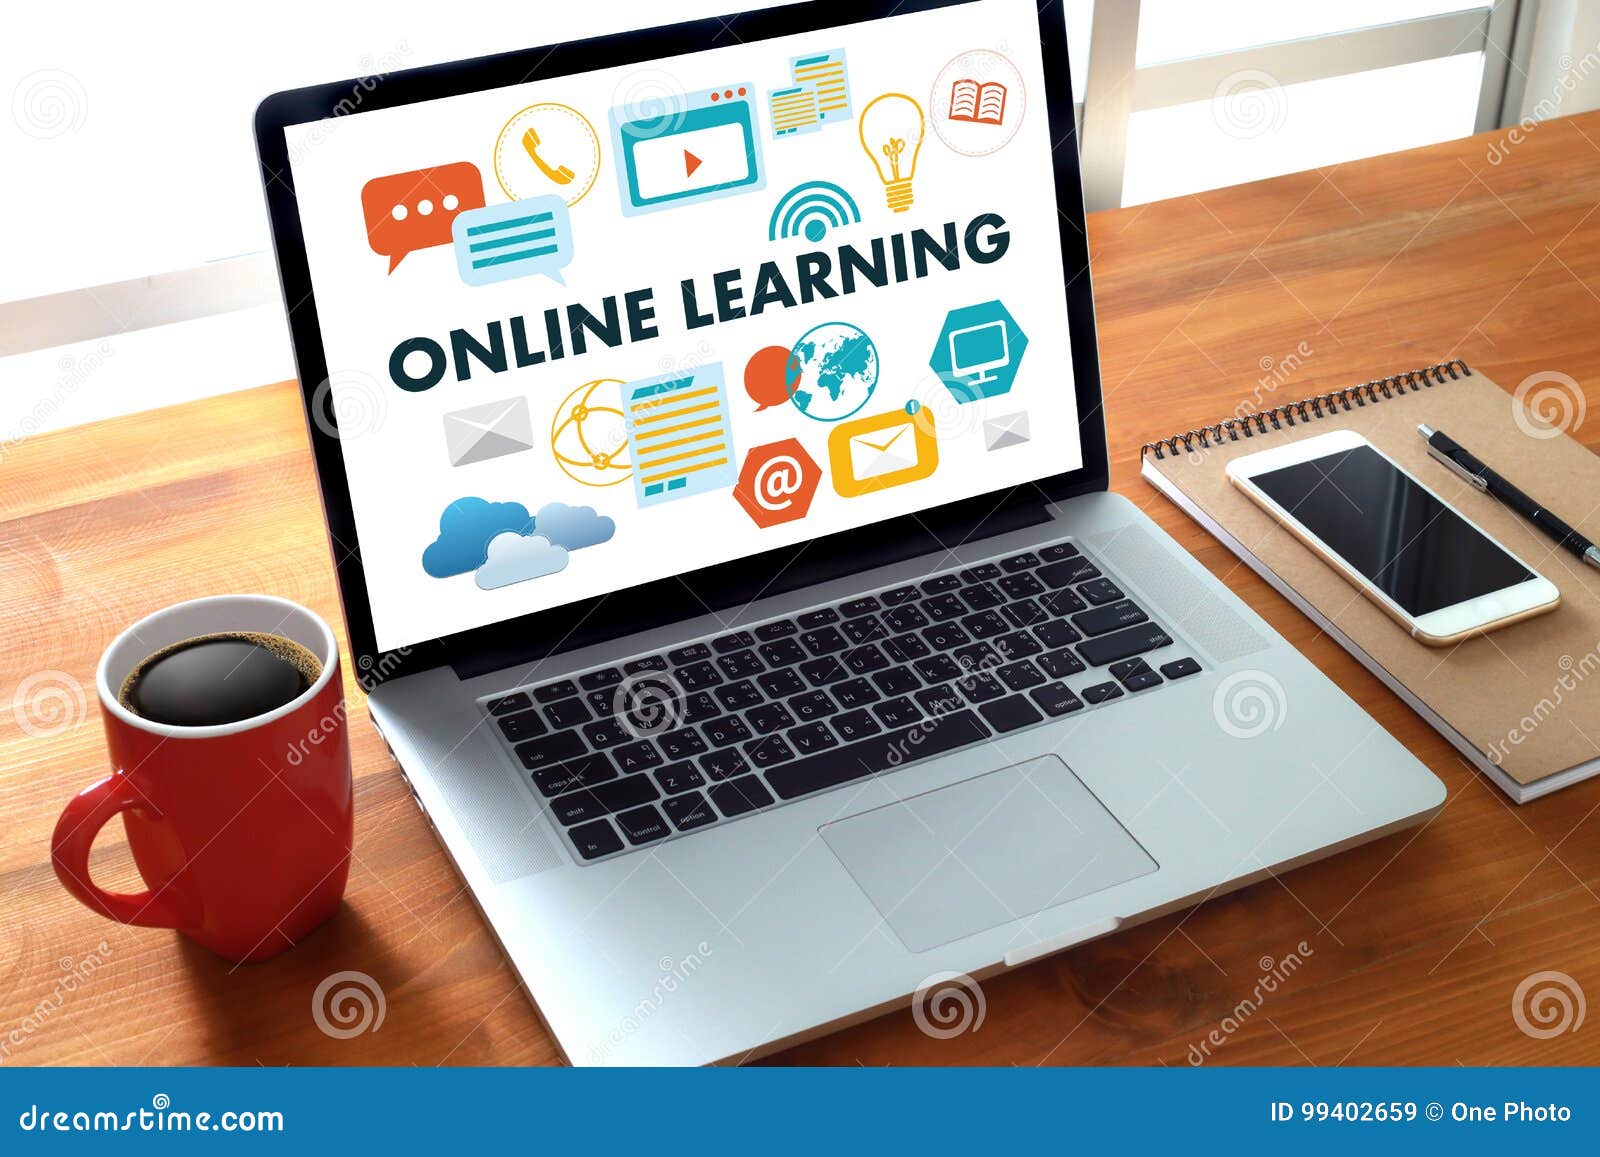 online learning connectivity technology coaching online skills t